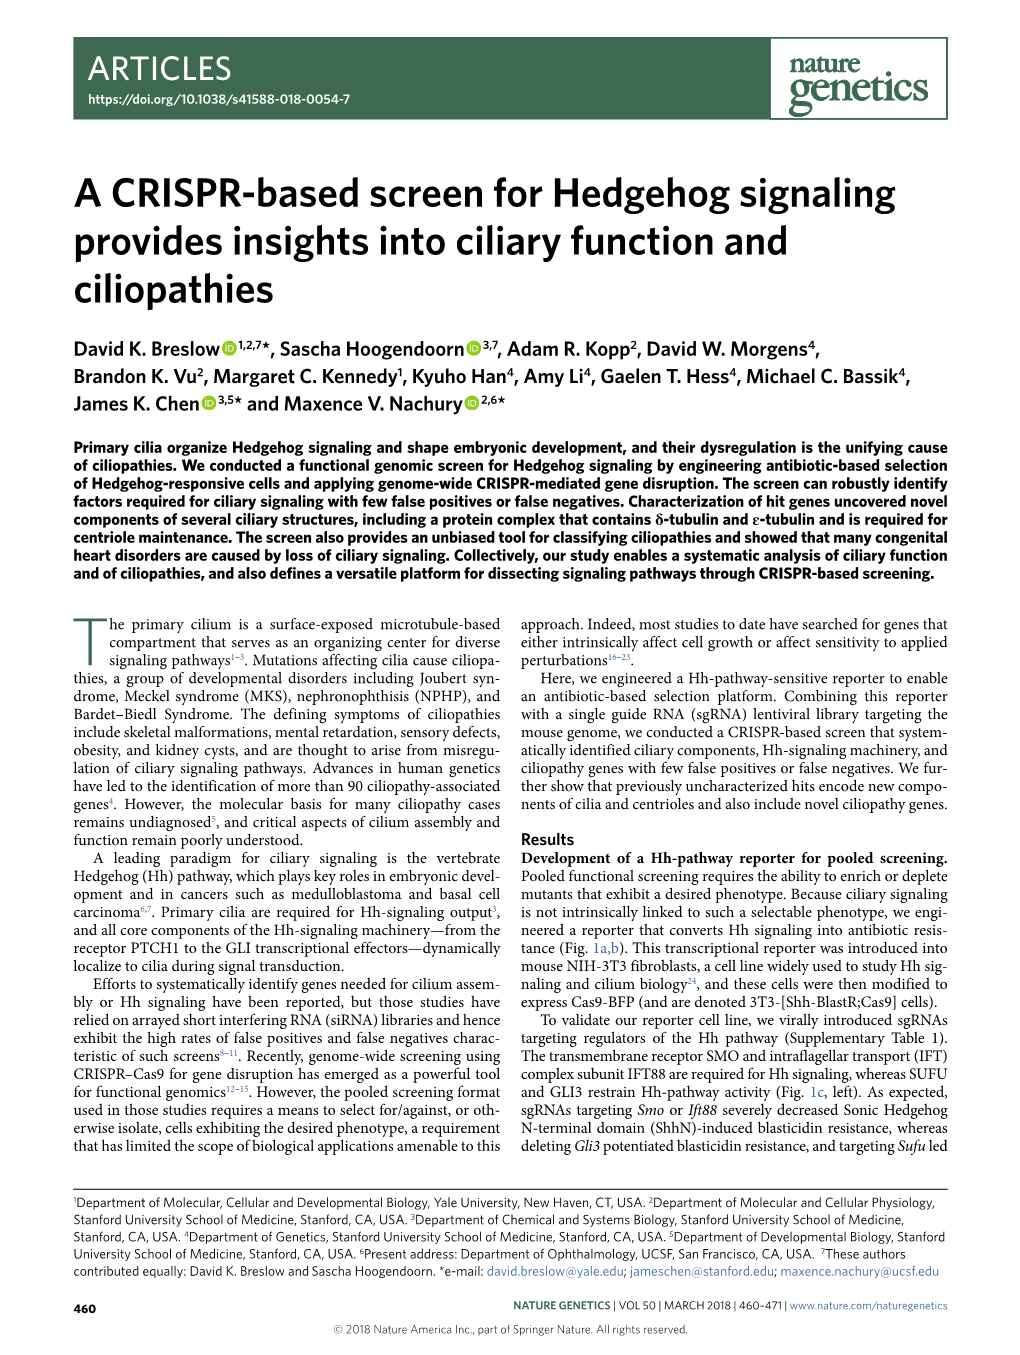 A CRISPR-Based Screen for Hedgehog Signaling Provides Insights Into Ciliary Function and Ciliopathies